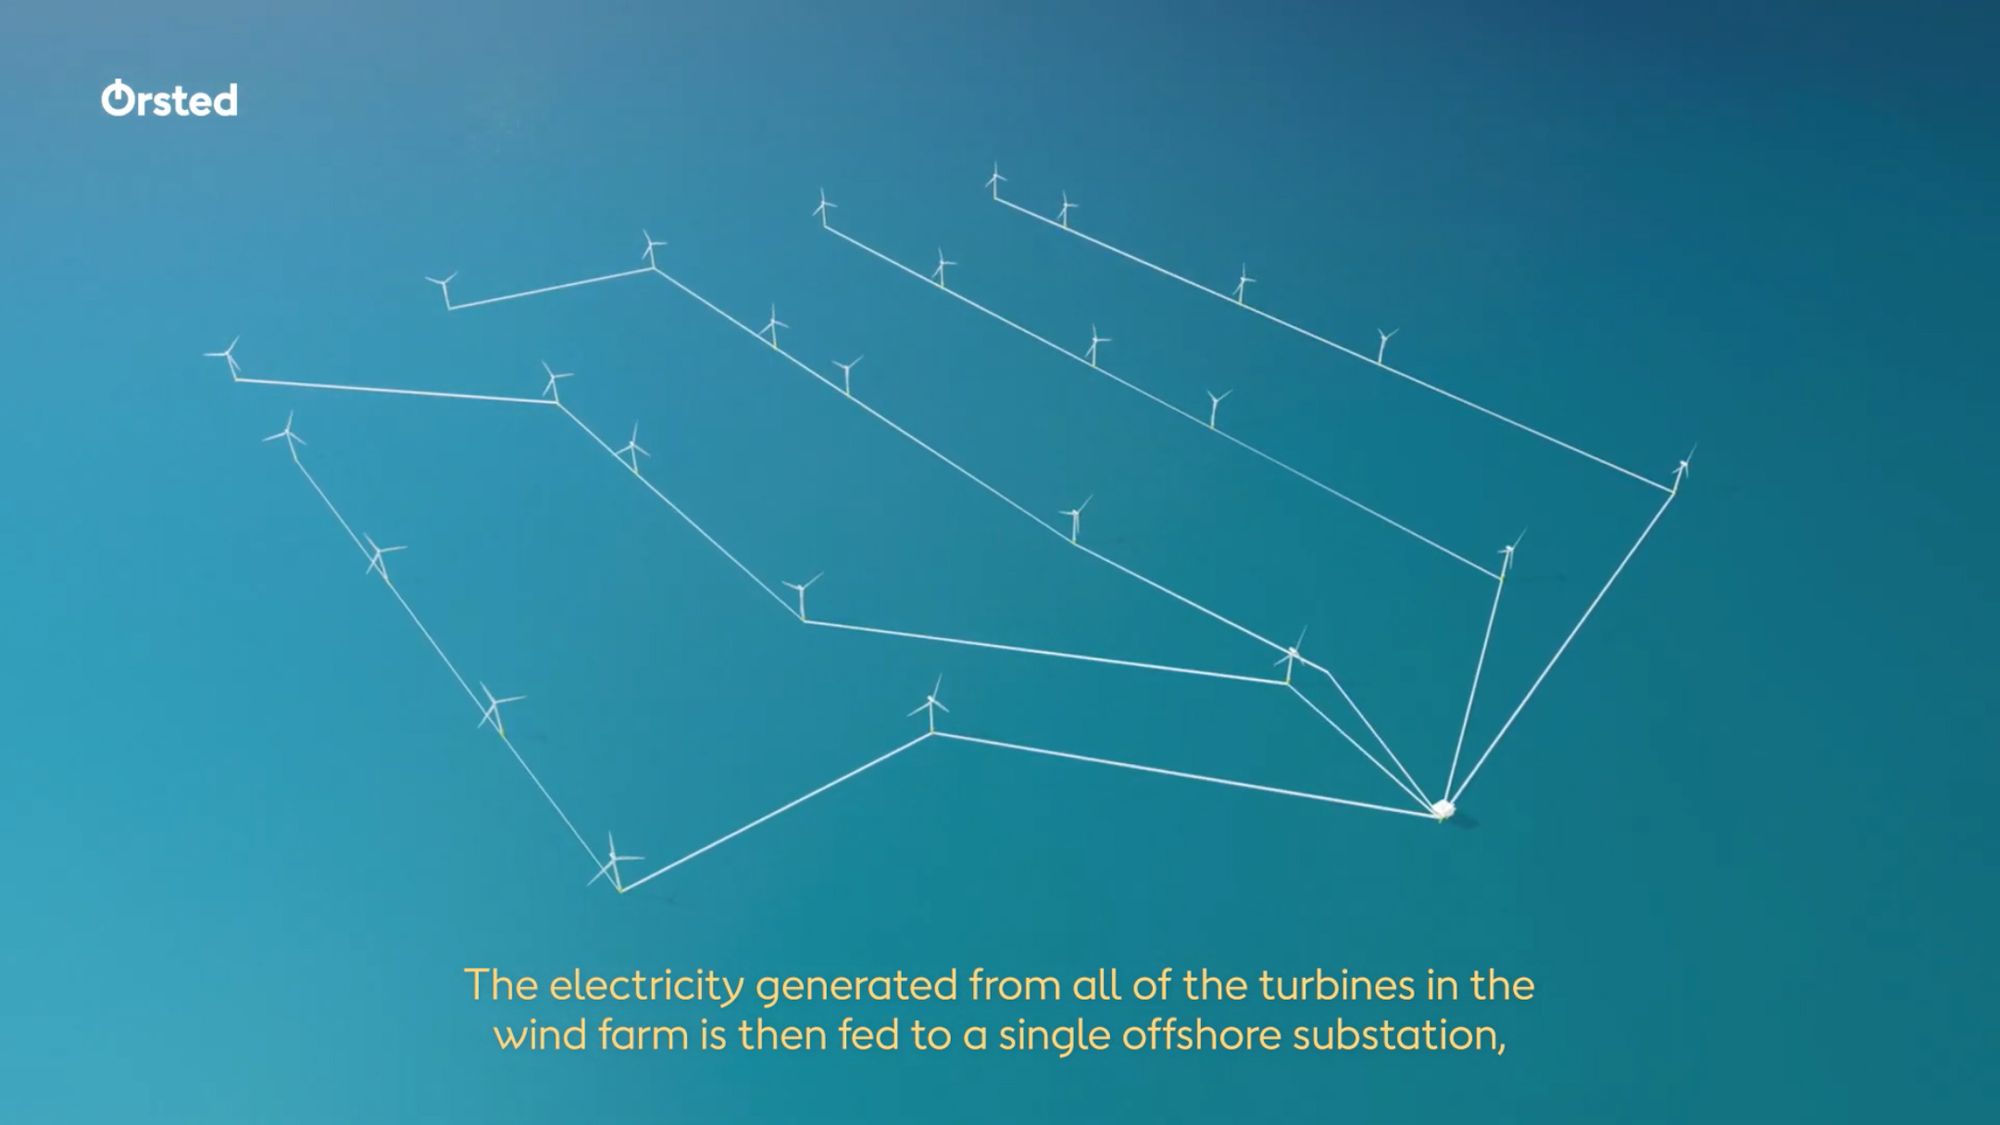 Turbine energy will direct to a single offshore substation before piped to an onshore substation. Source: Orsted